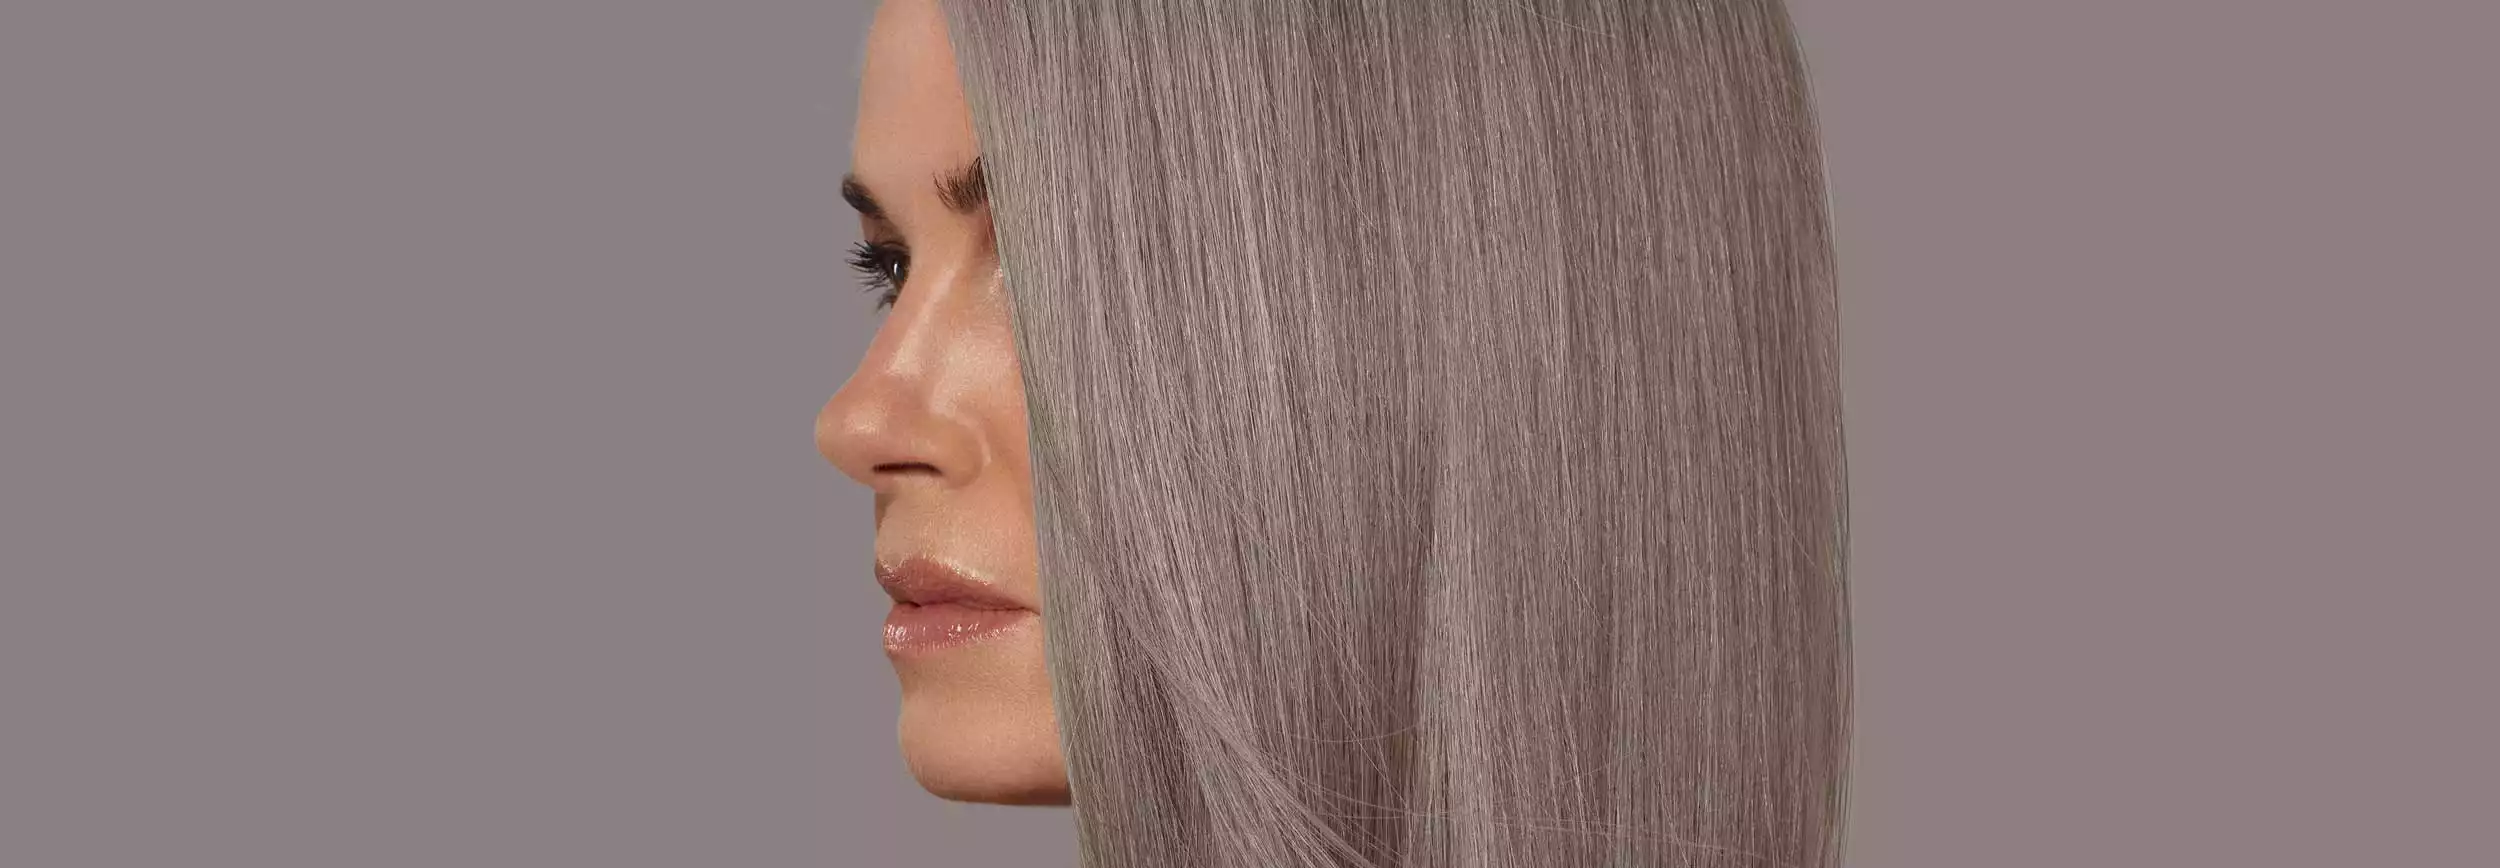 How To Make Gray Hair Bright and Shiny - Revlon Professional